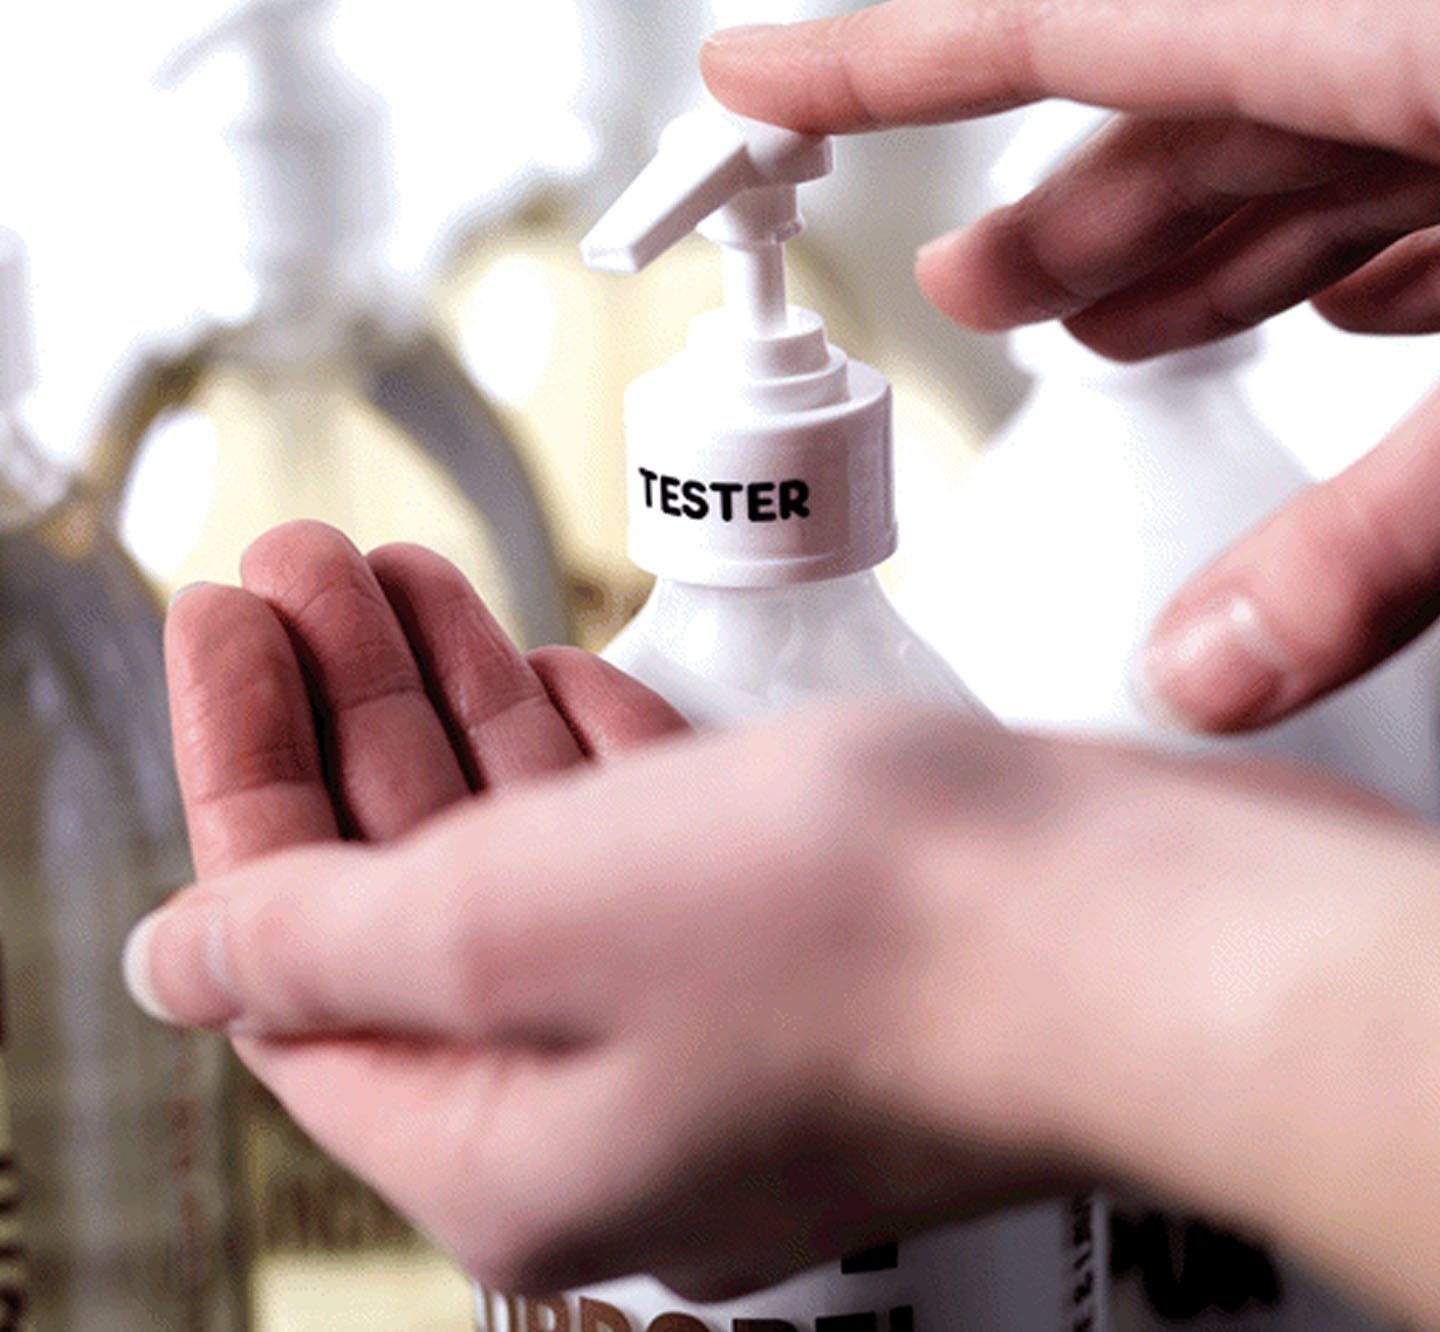 A hand pressing down on a labeled dispenser.